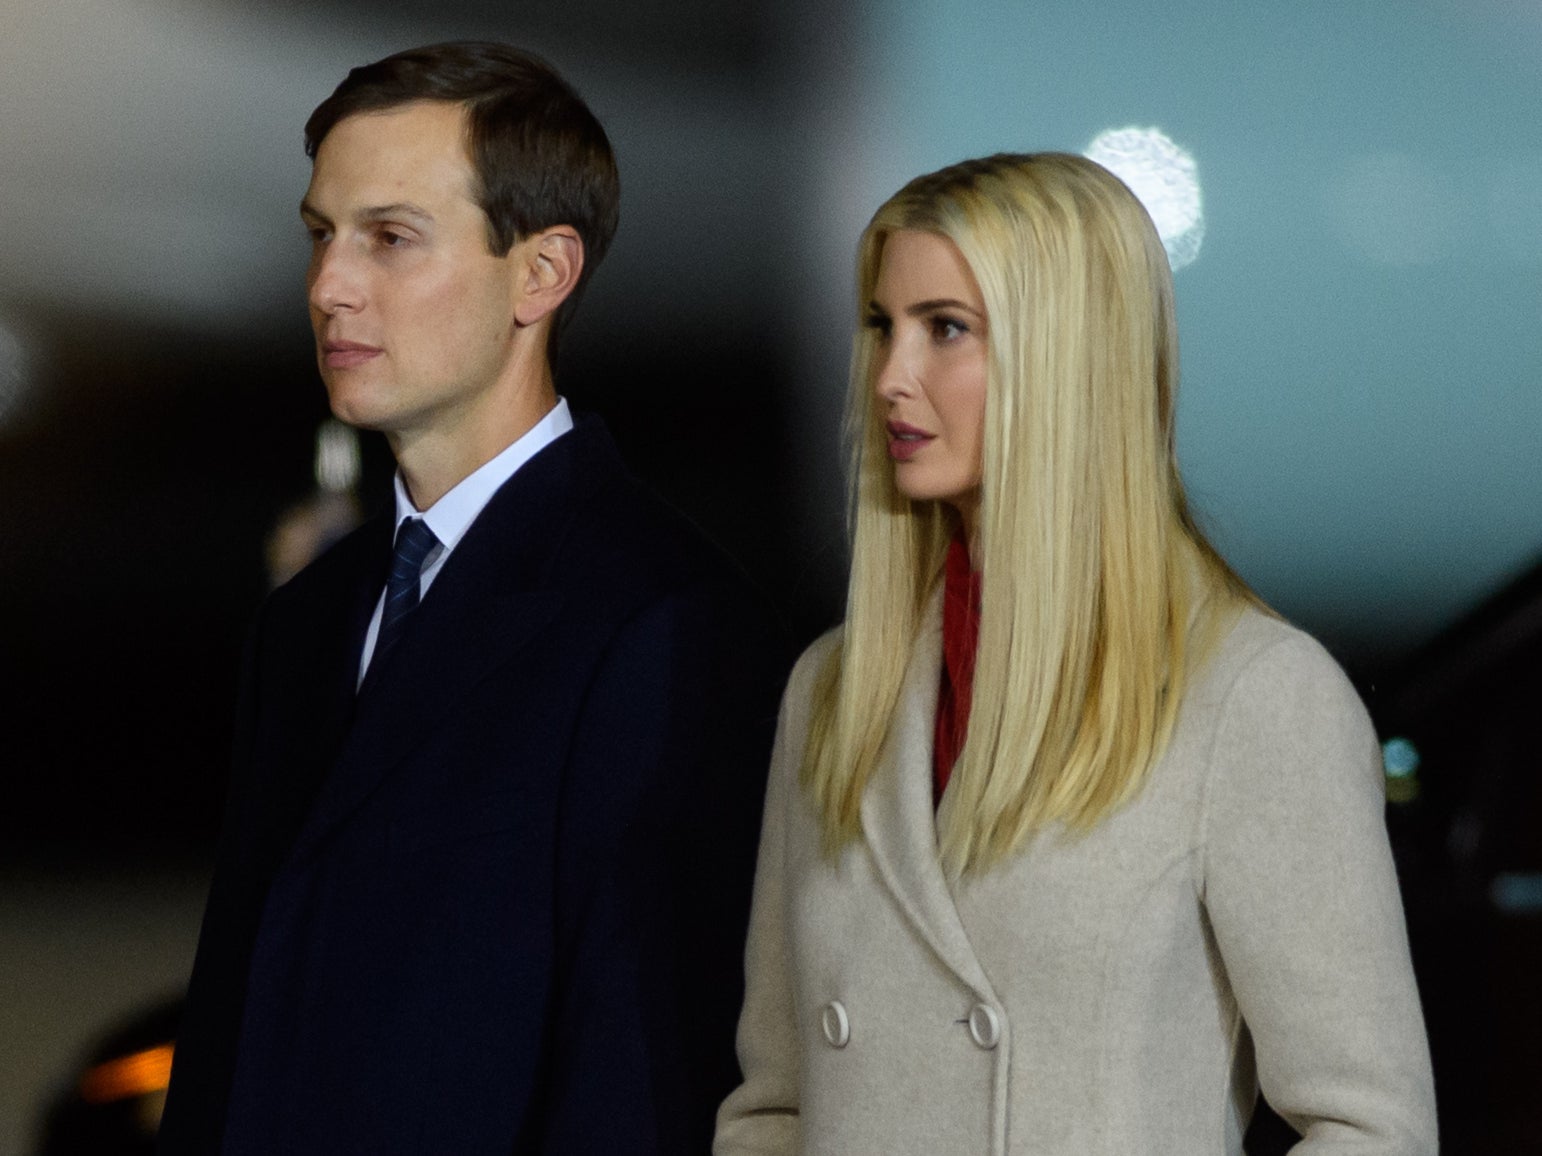 Jared Kushner and Ivanka Trump at a campaign rally for Donald Trump on 22 September 2020 in Moon Township, Pennsylvania